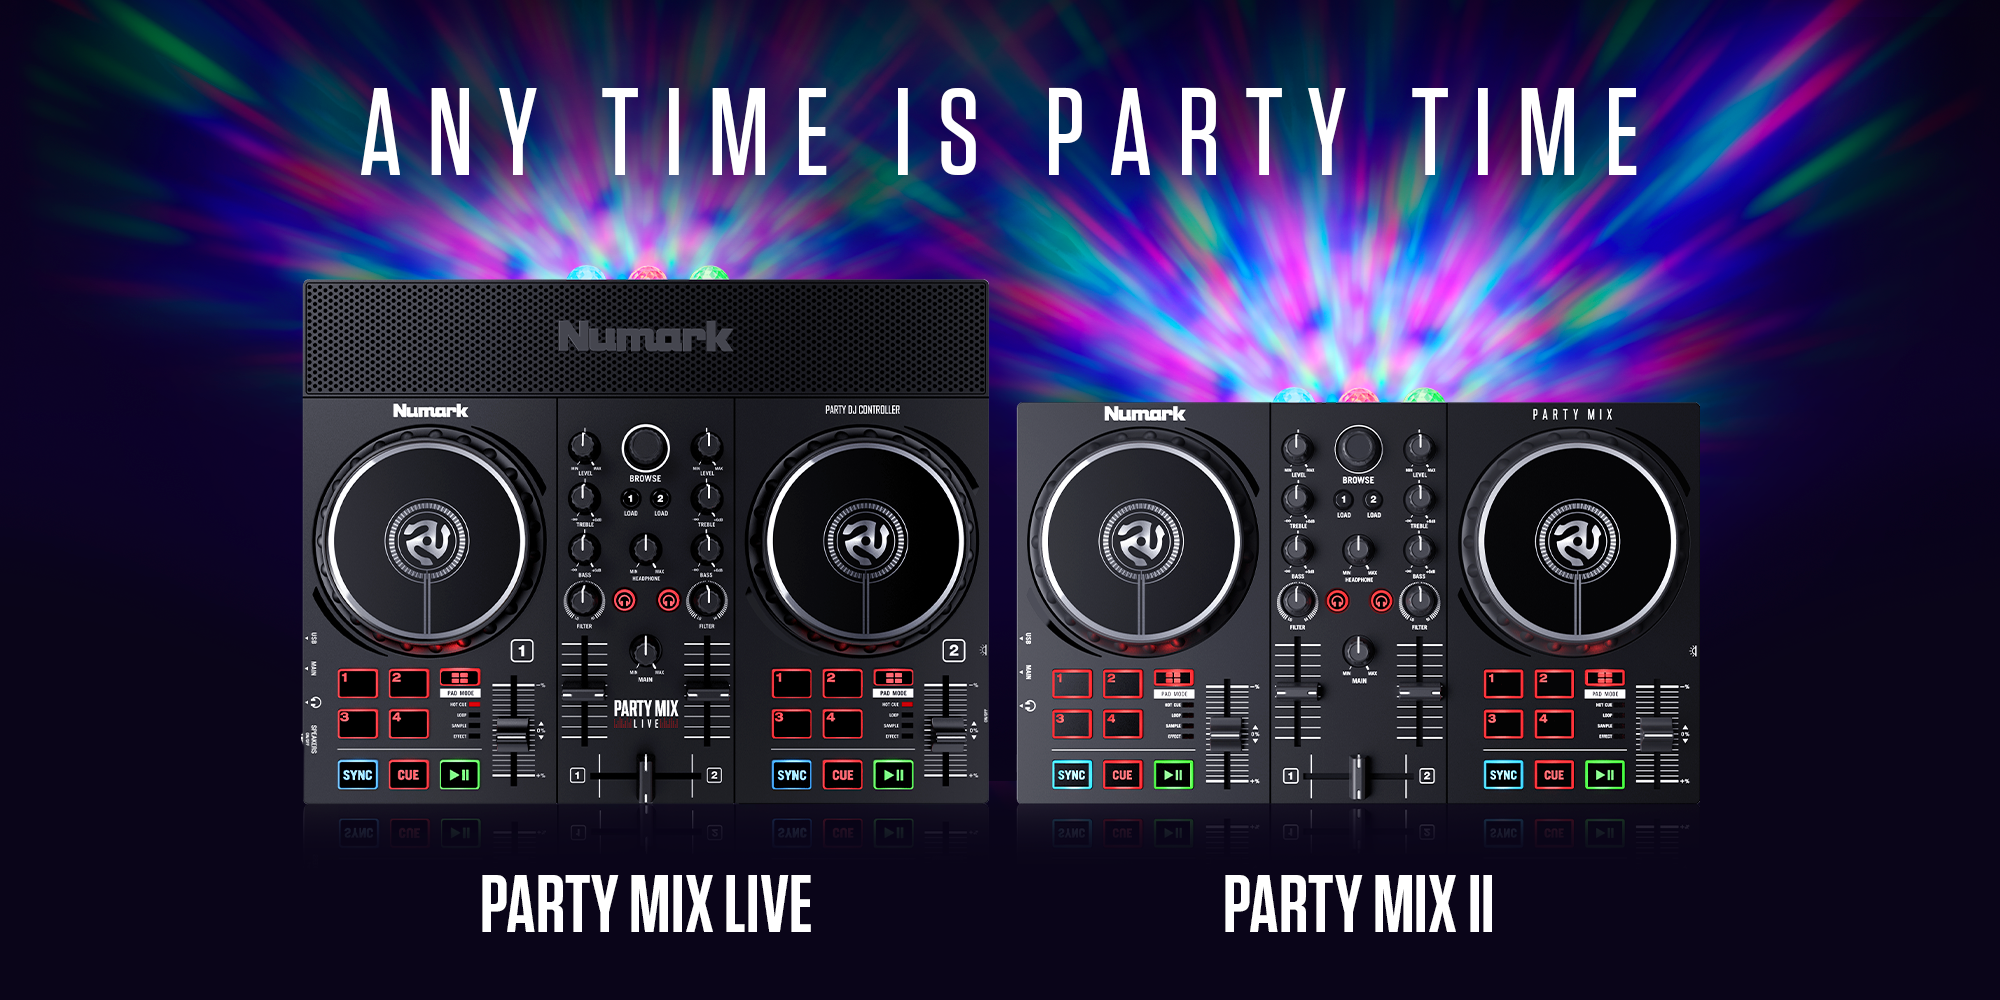 Numark’s new Party Mix II and Party Mix Live DJ controllers bring the lights and speakers to the party